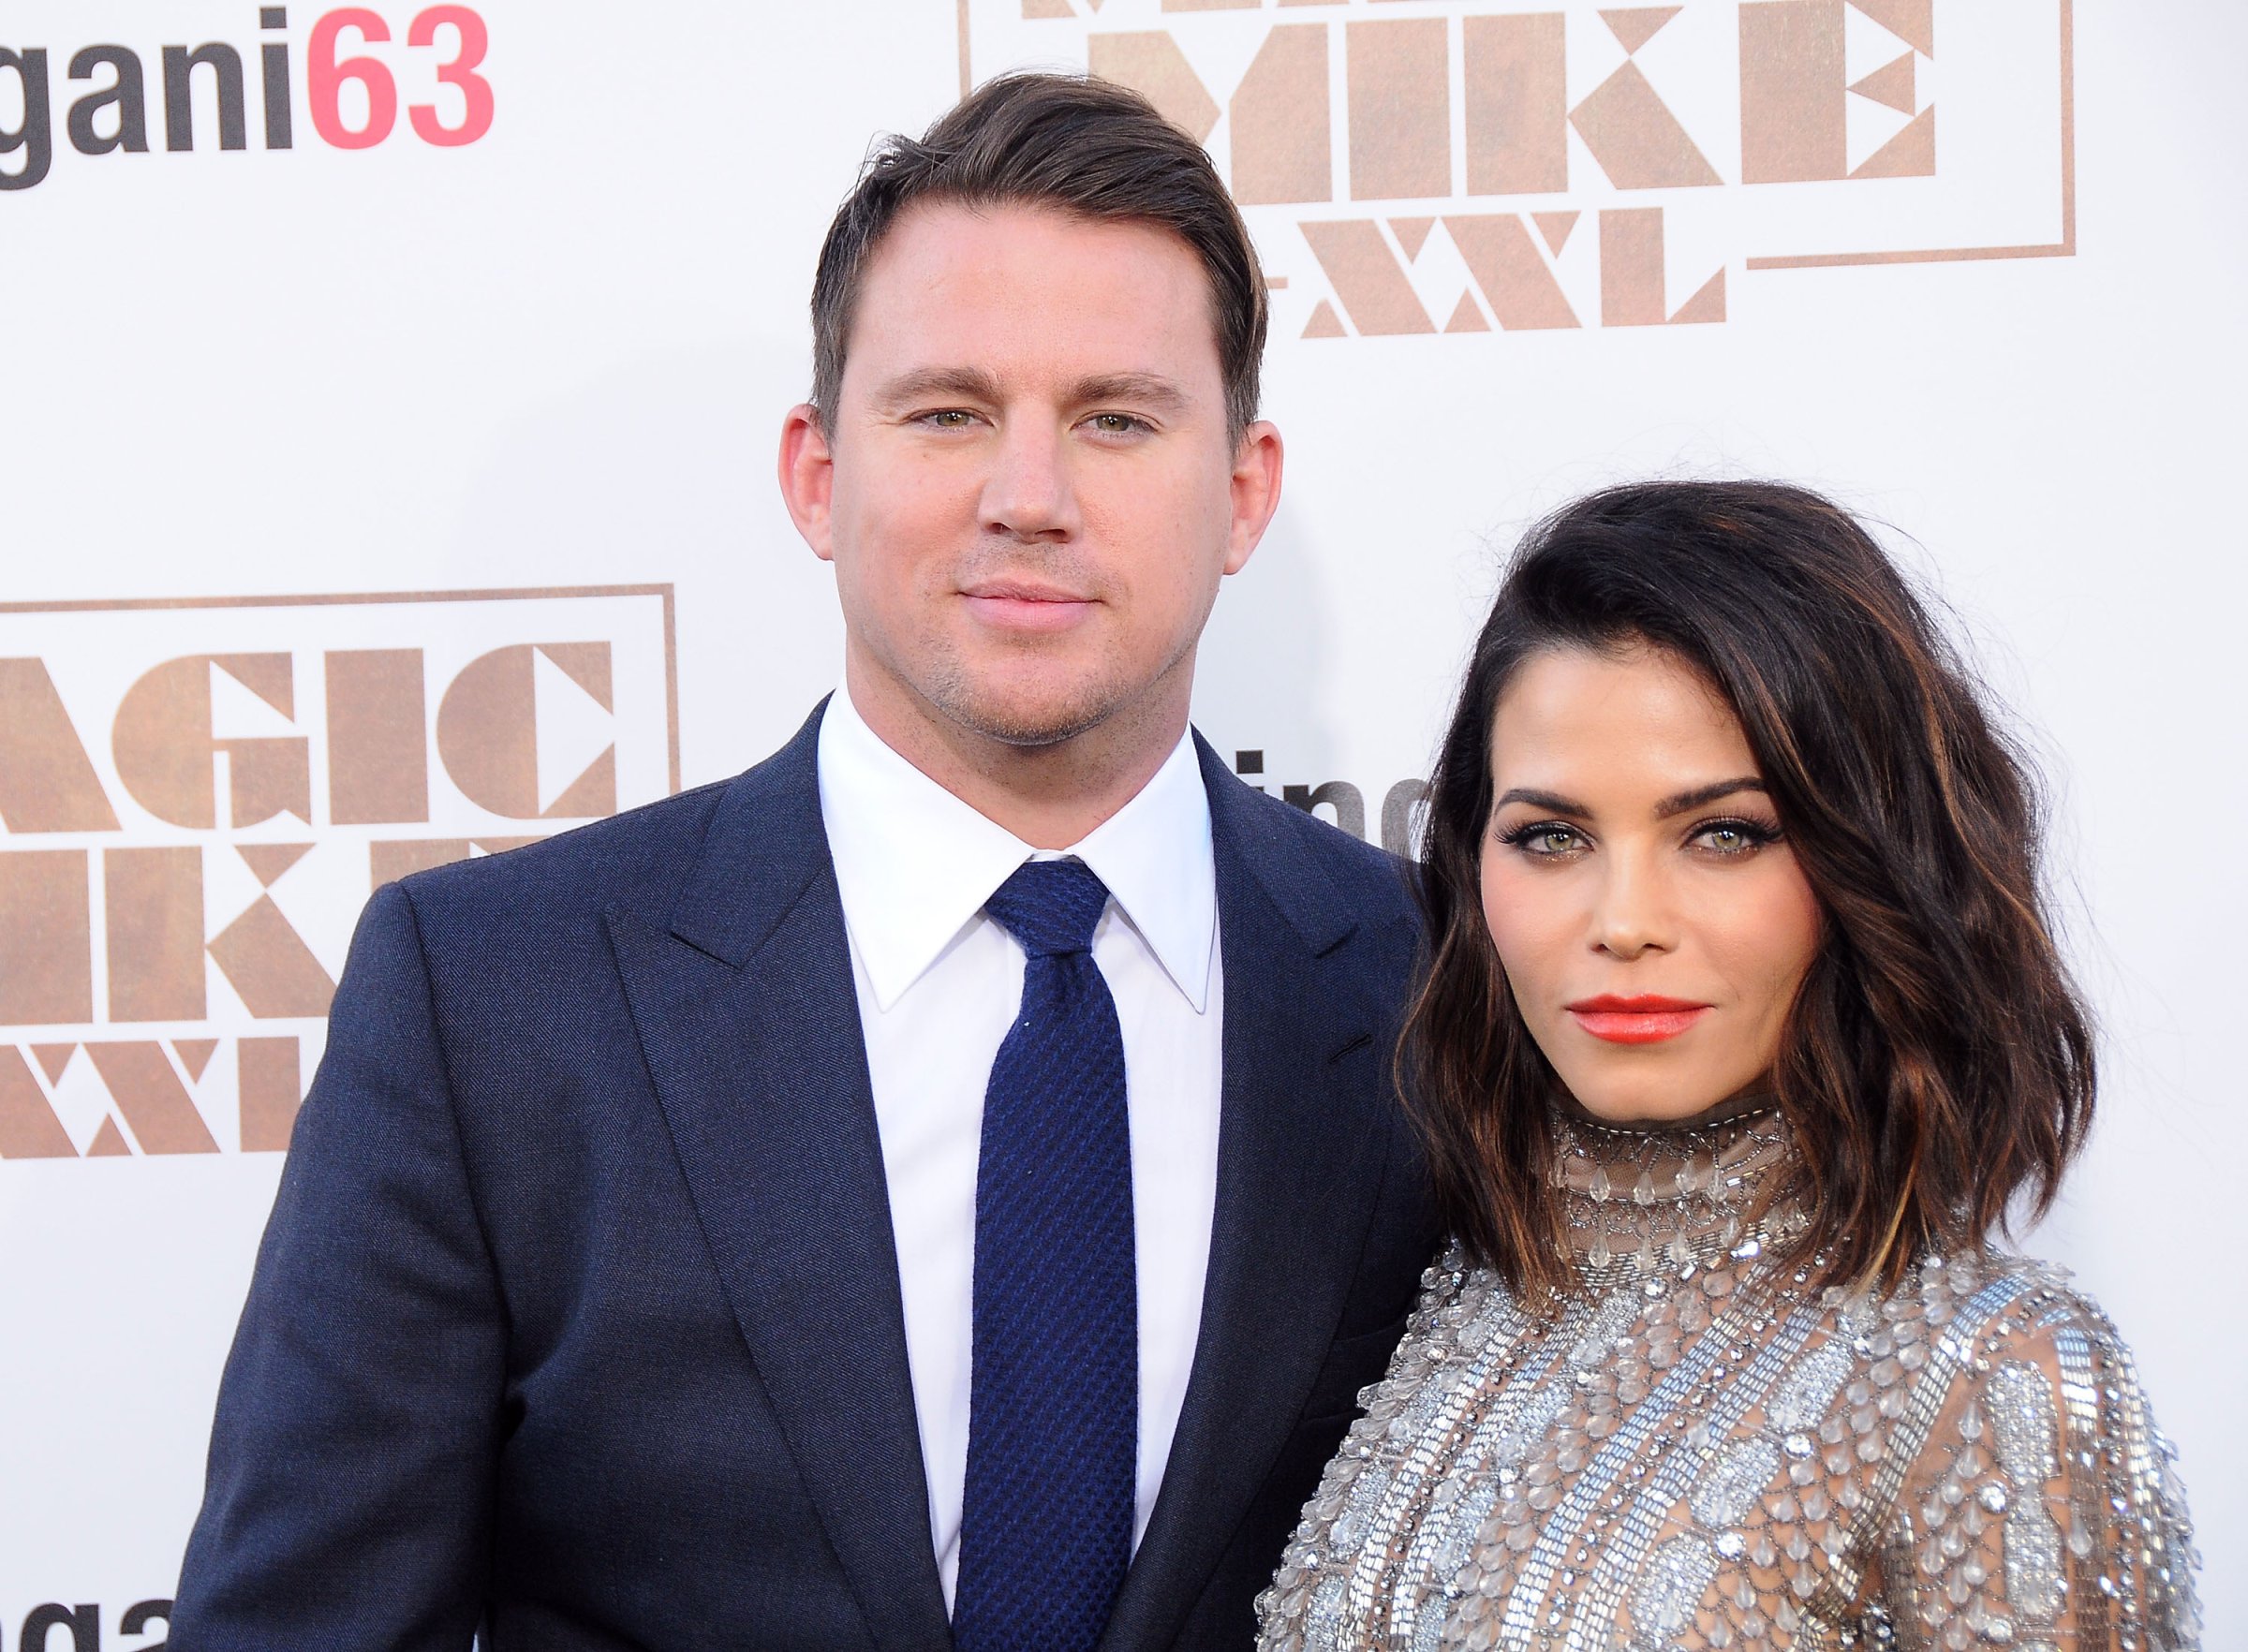 Premiere Of Warner Bros. Pictures' "Magic Mike XXL" - Arrivals